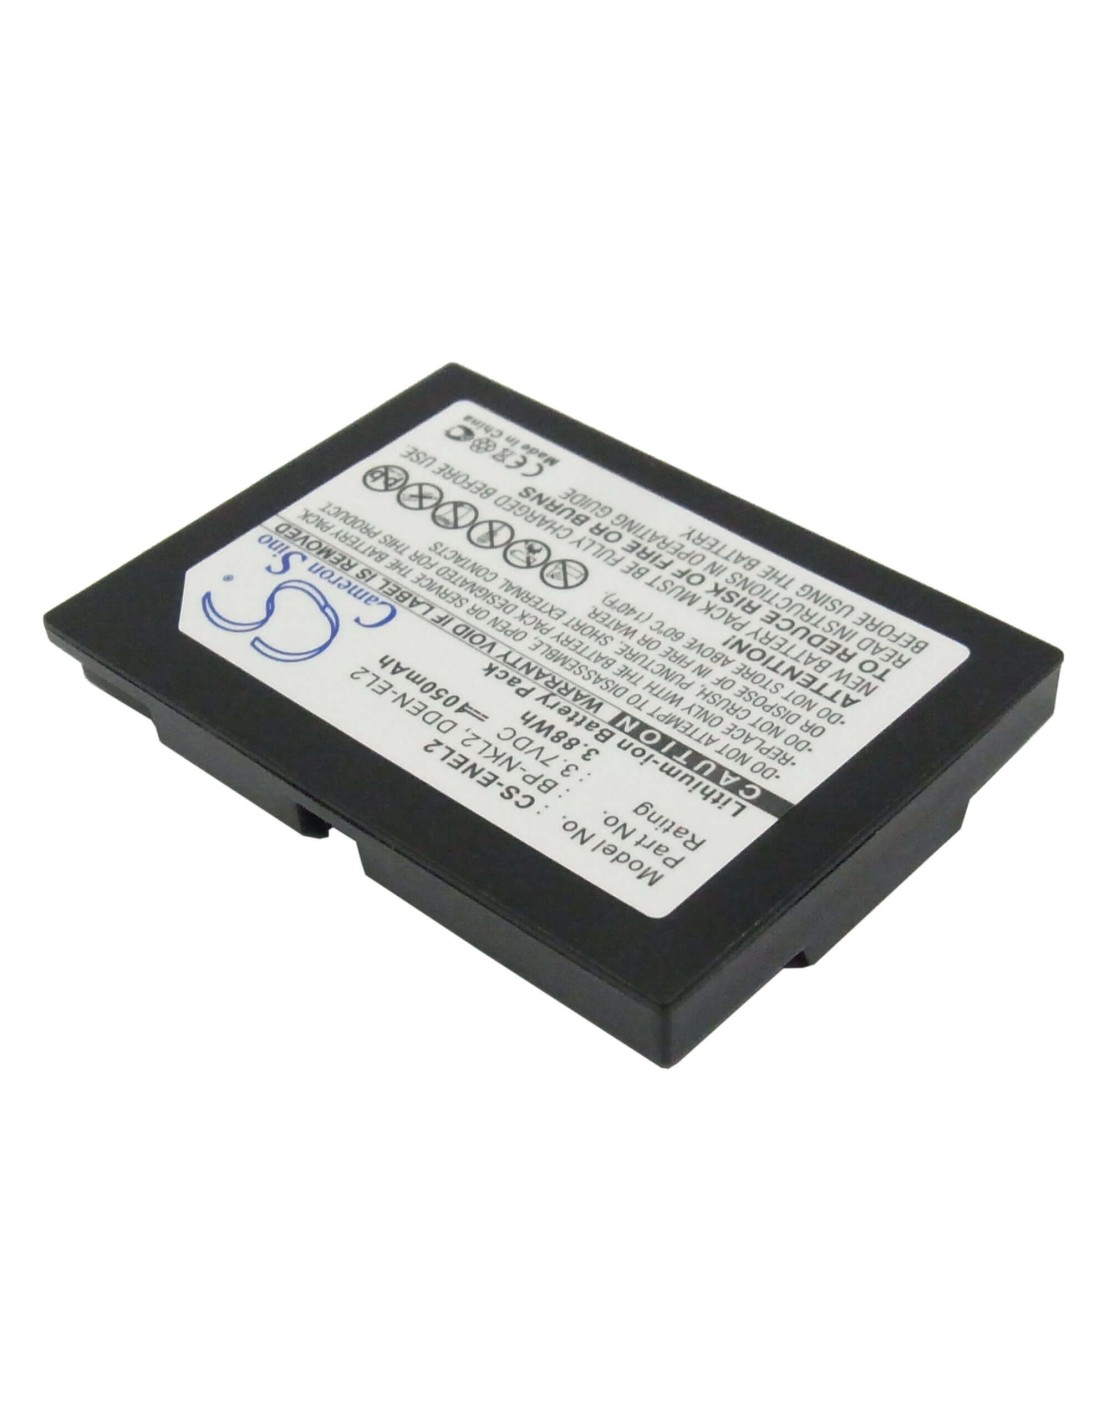 Battery for Nikon Coolpix 2500, Coolpix 3500, 3.7V, 1050mAh - 3.89Wh